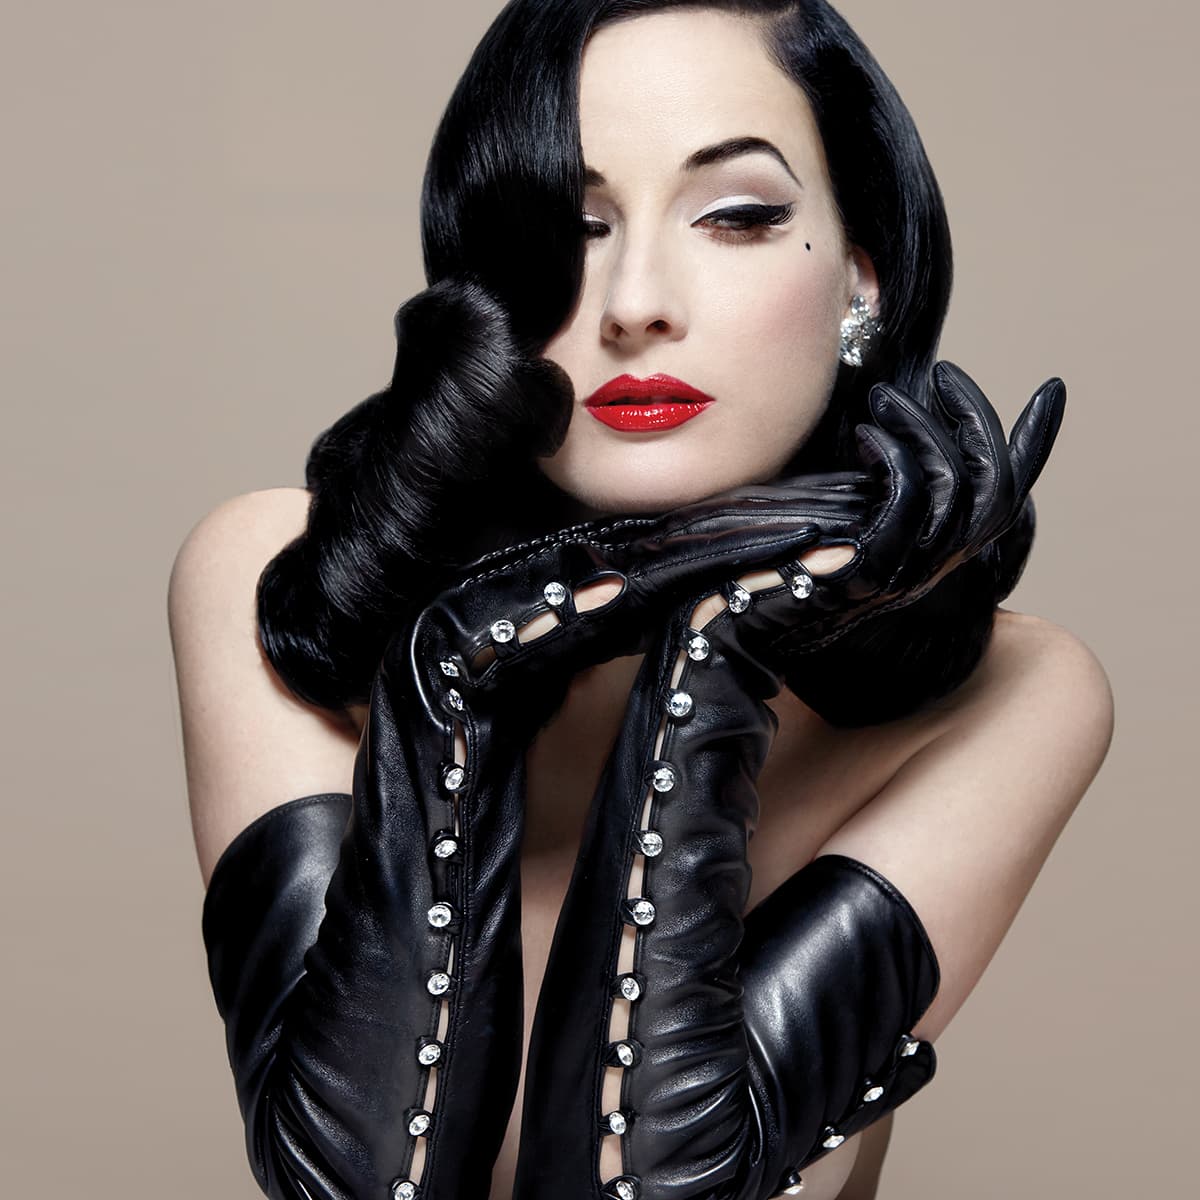 How Dita Von Teese's O.C. past paved the way for her shimmying